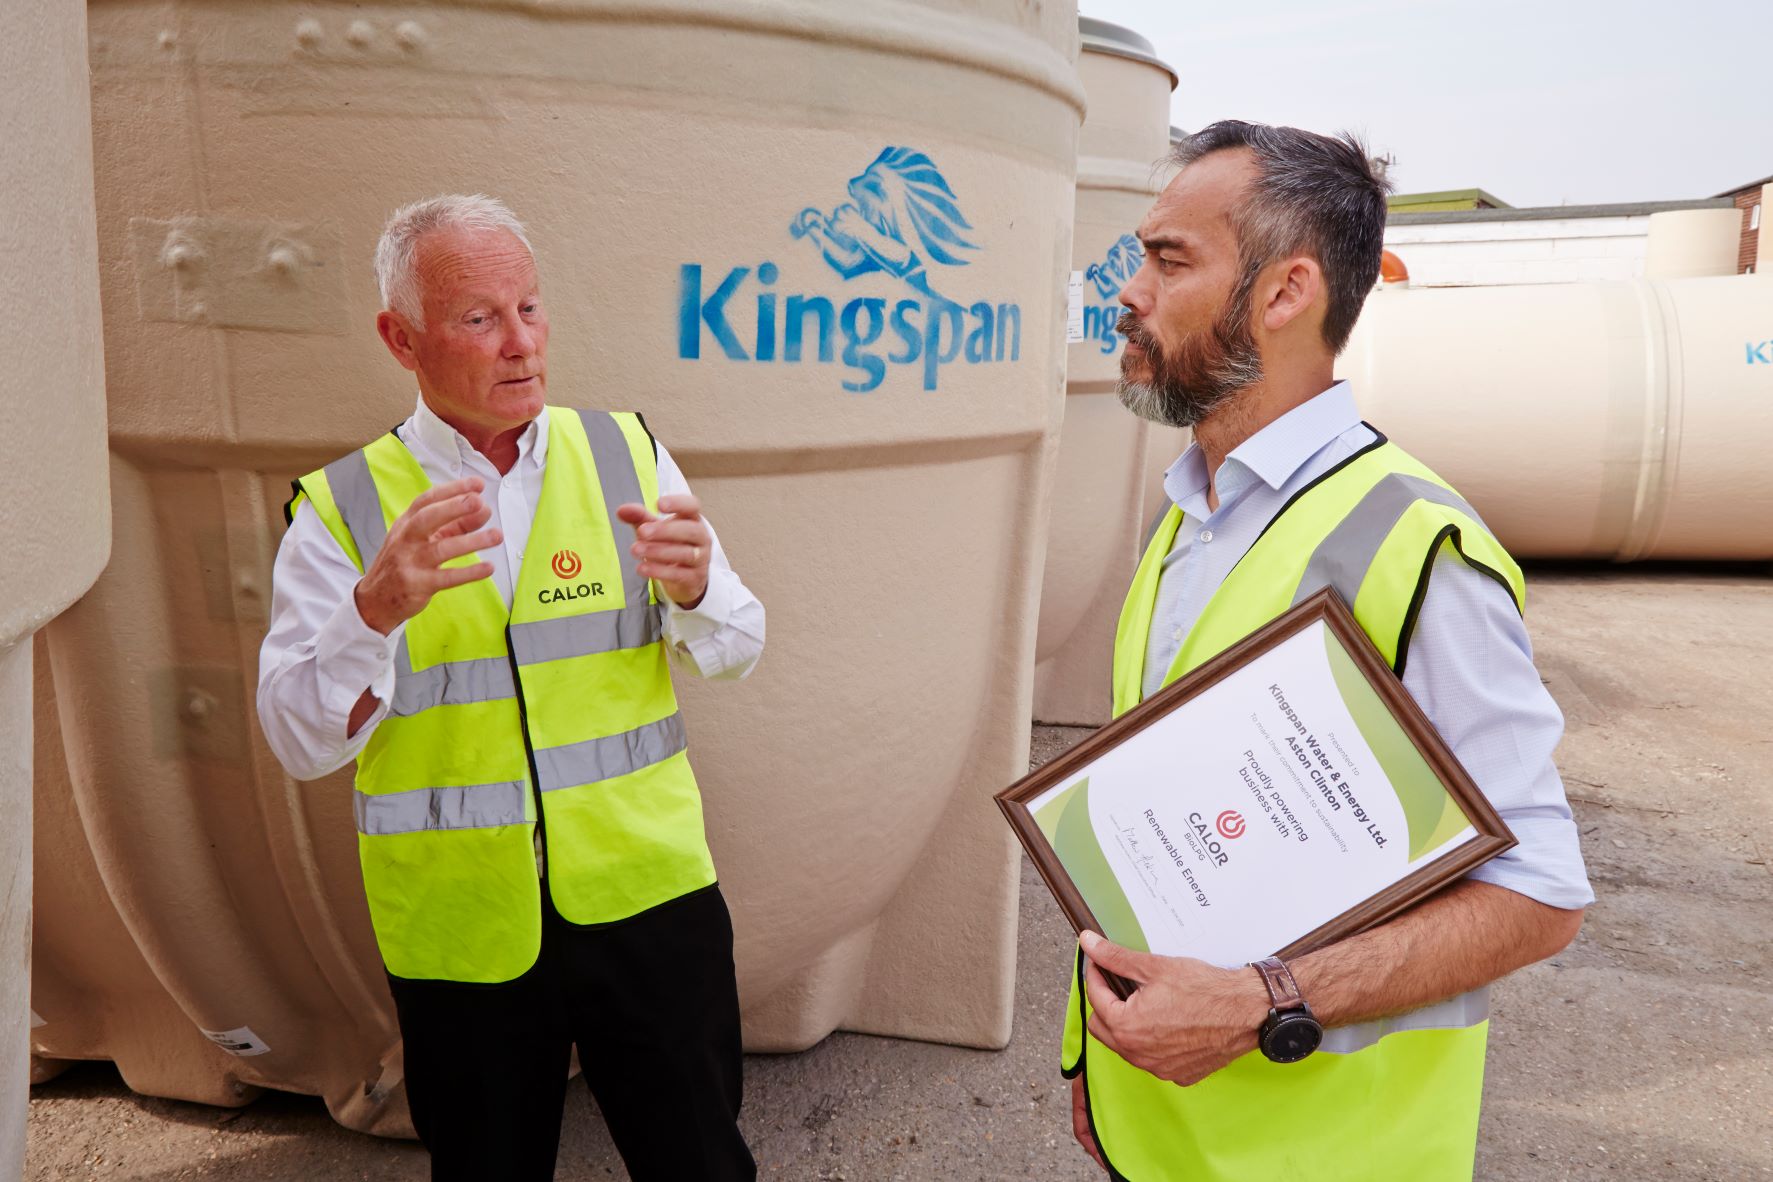 Calor worker working with Kingspan